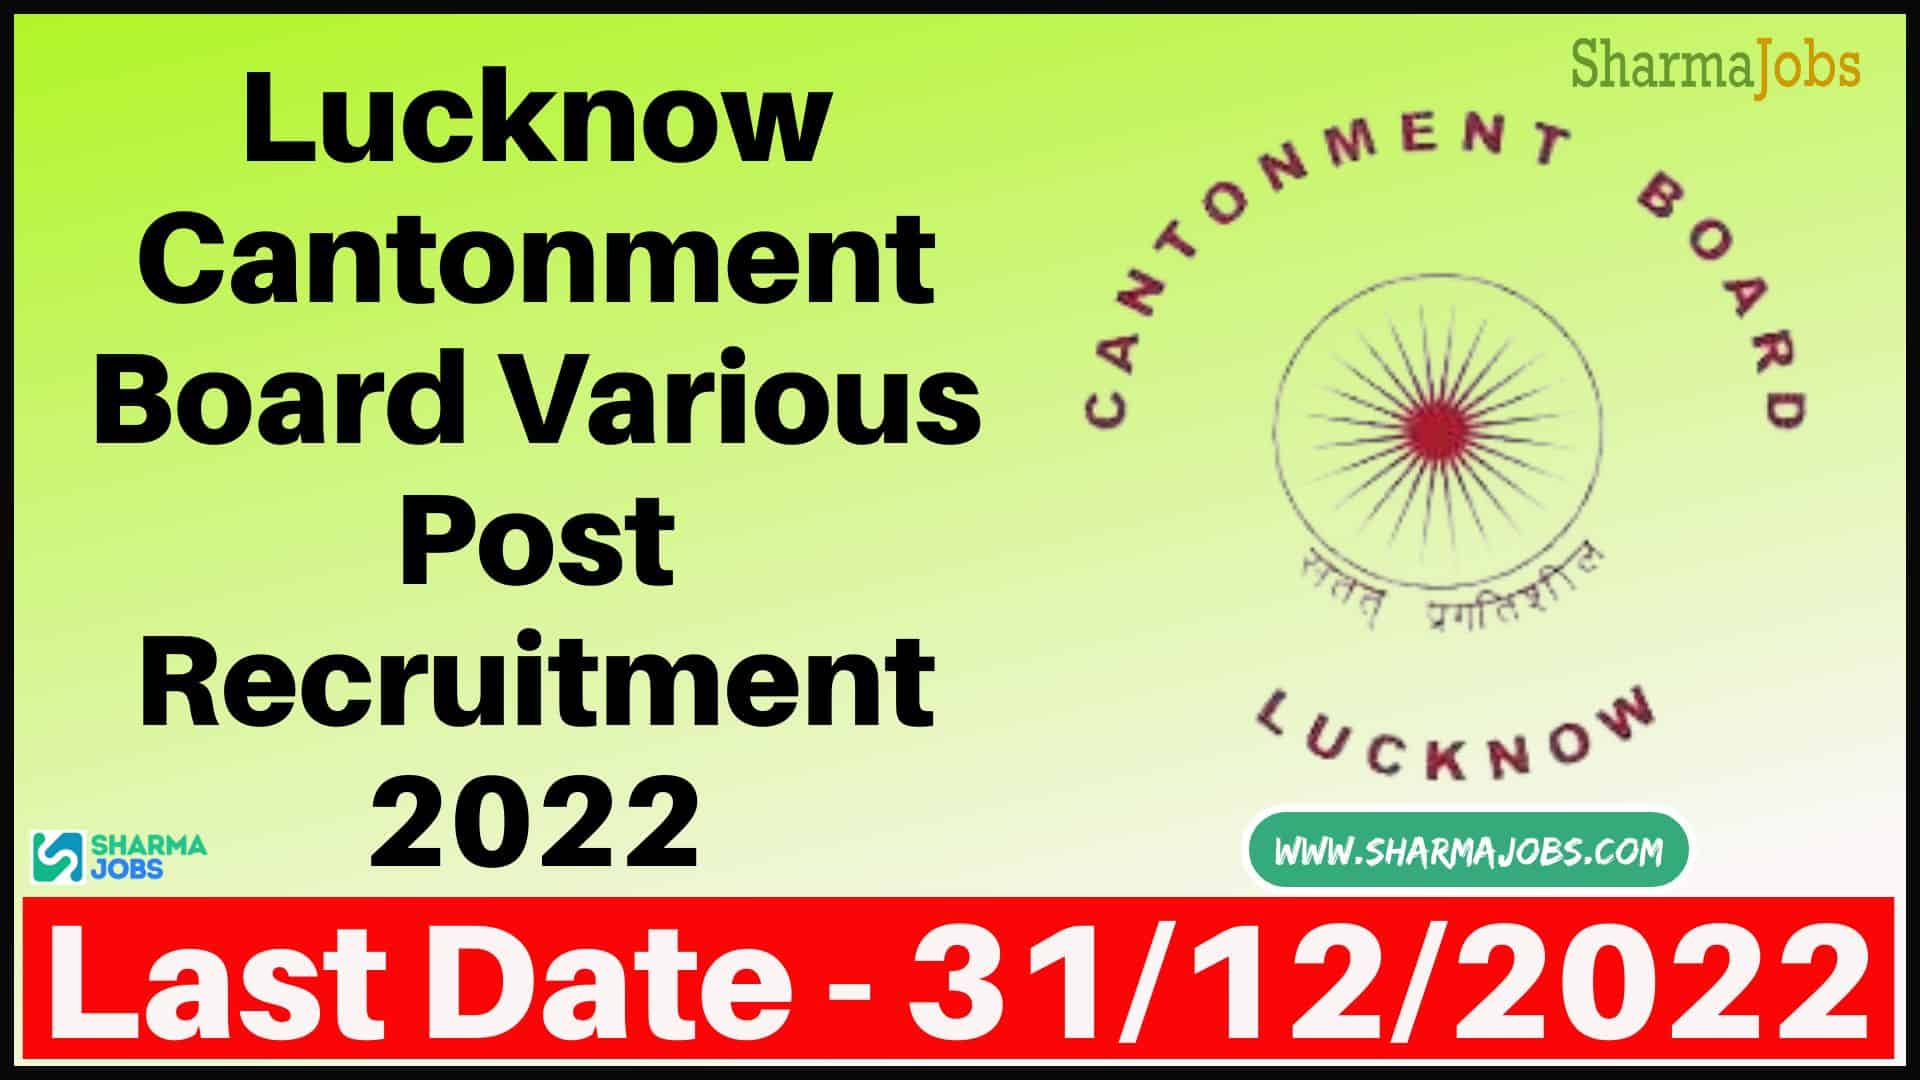 Lucknow Cantonment Board Various Post Recruitment 2022